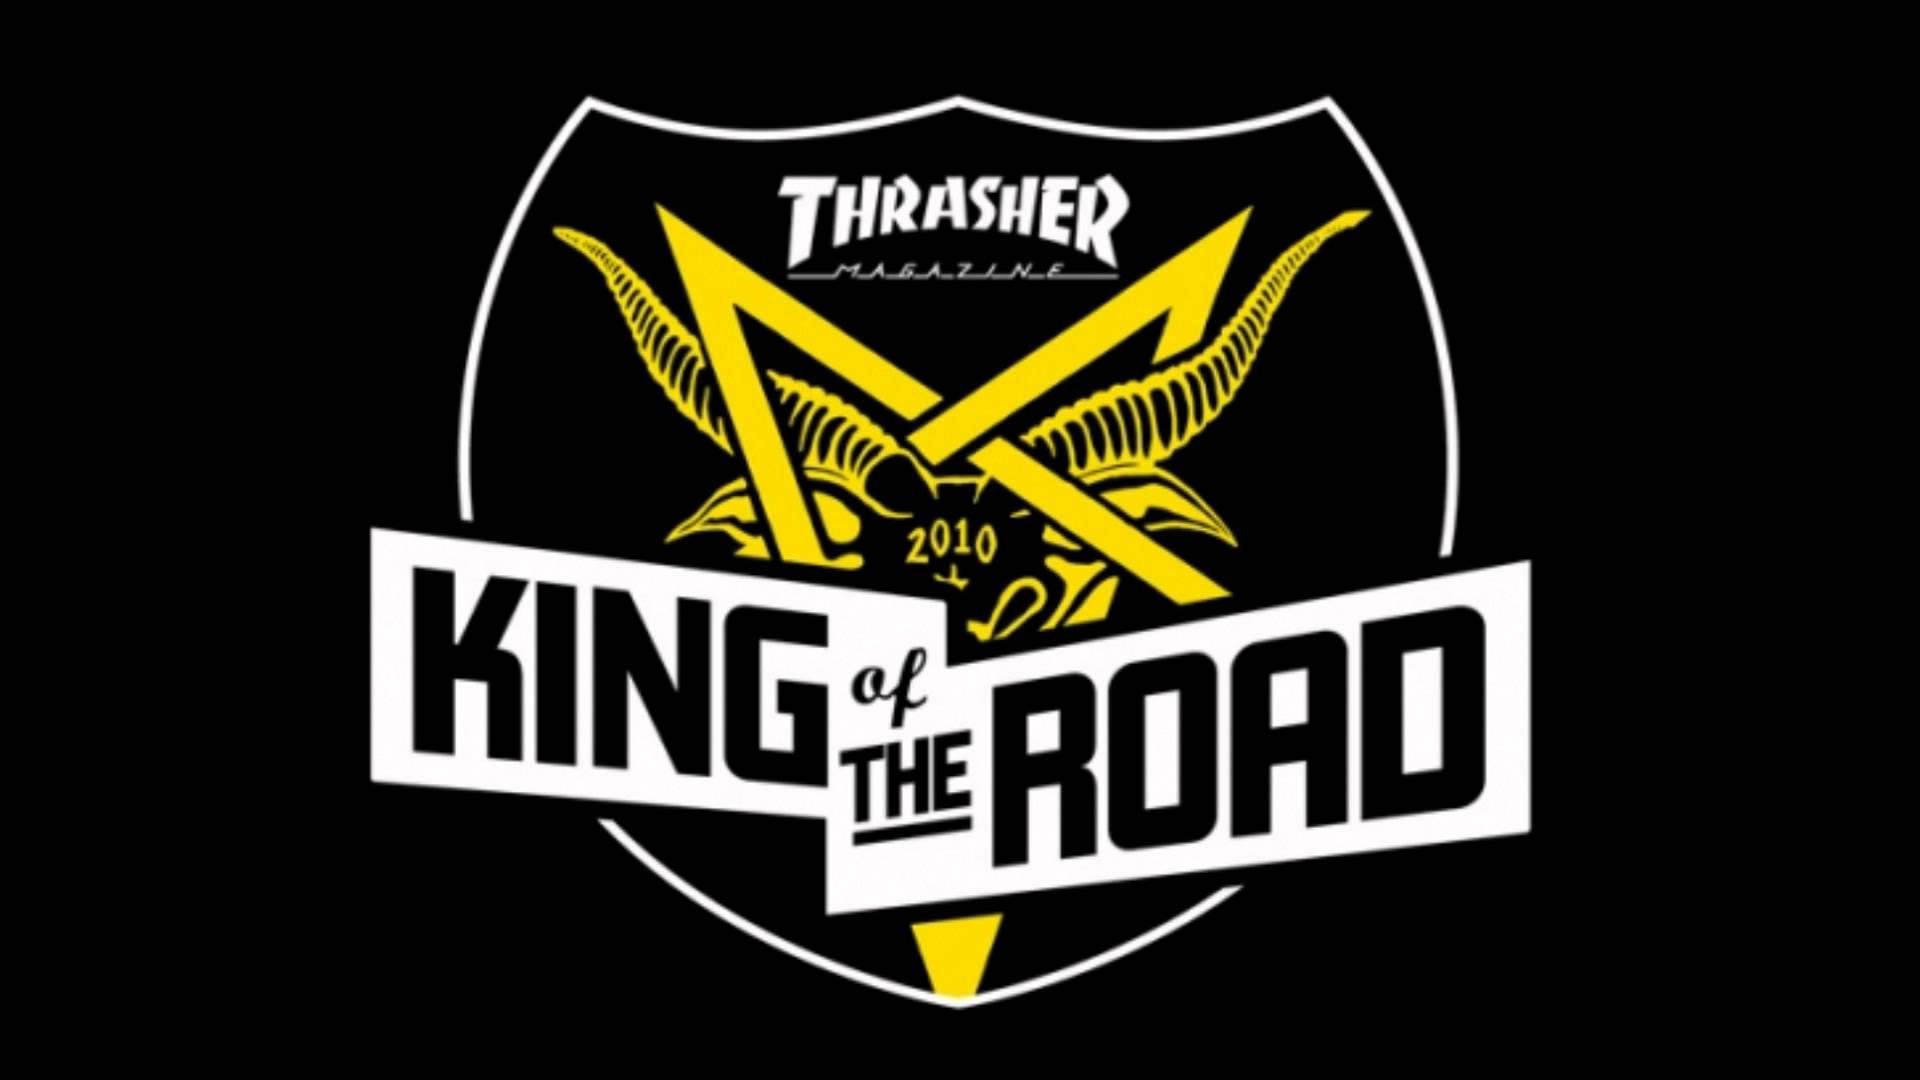 THRASHER wallpaper by RoggerPG  Download on ZEDGE  61ac